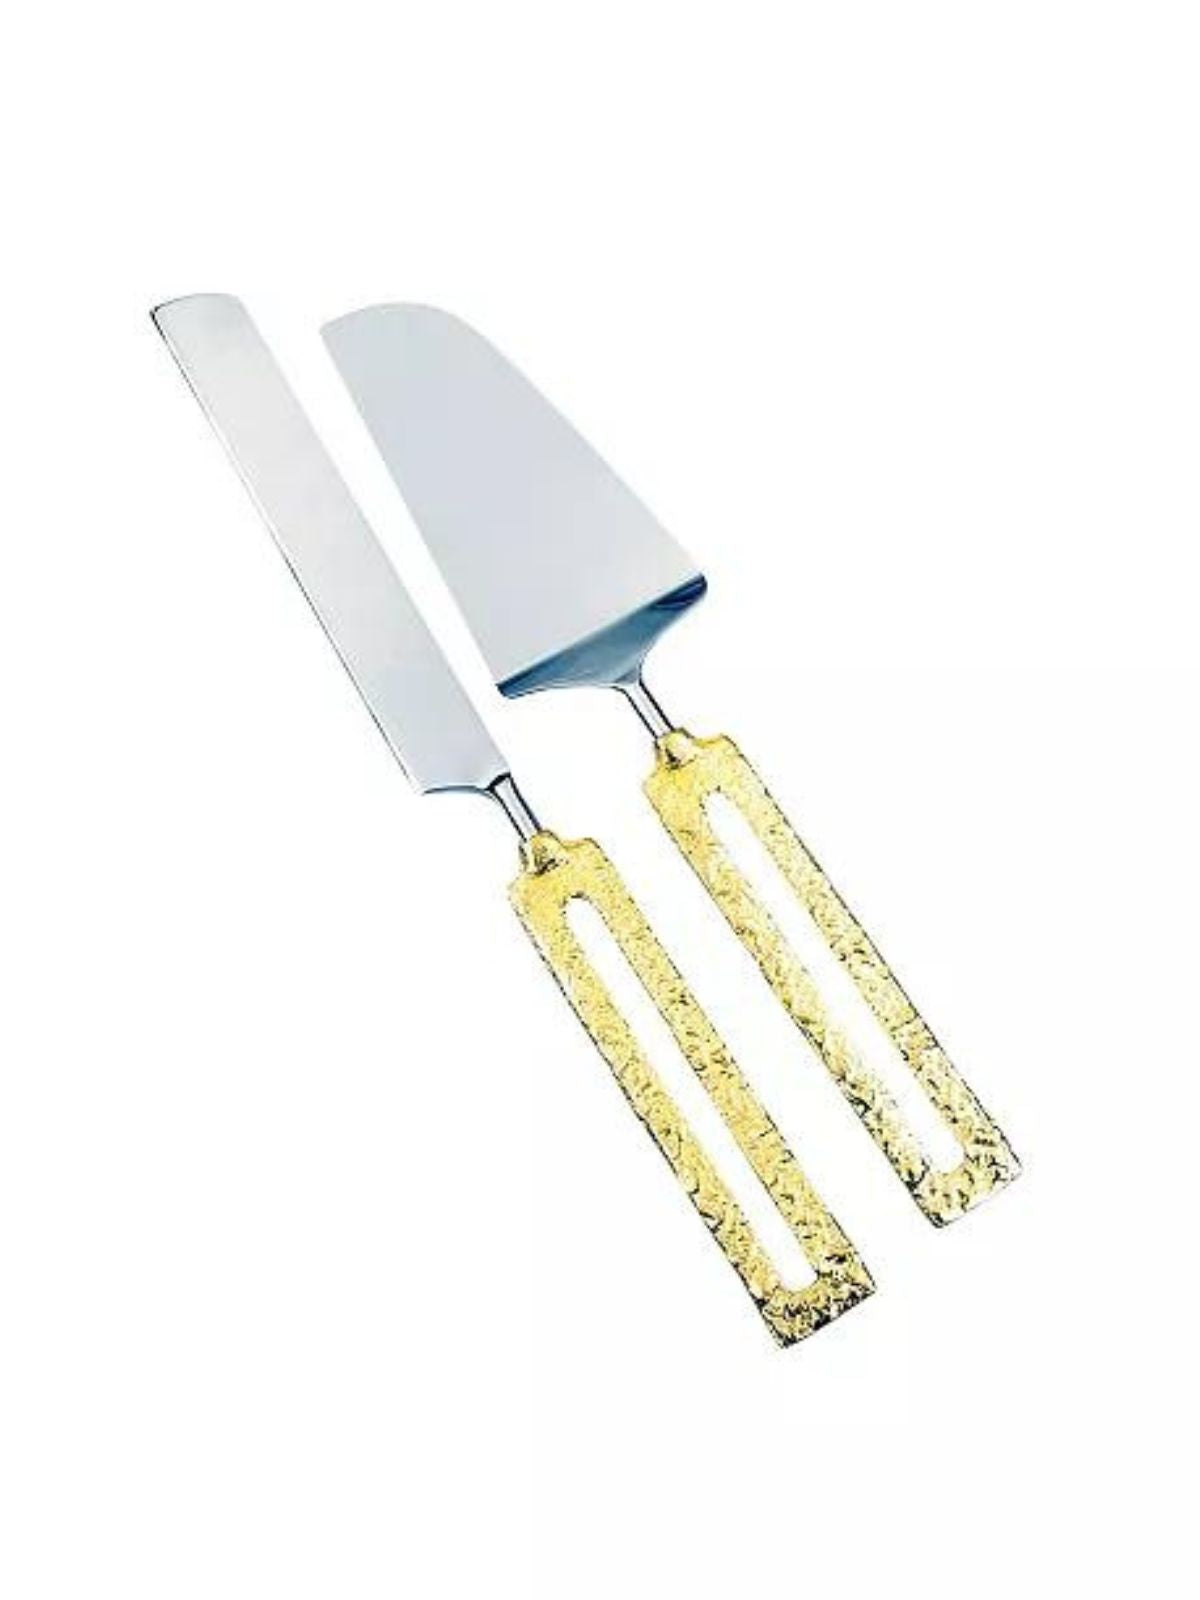 This hand-crafted cake server set features two-toned colors with a slight hammered gold square loop design measuring 11in Length.